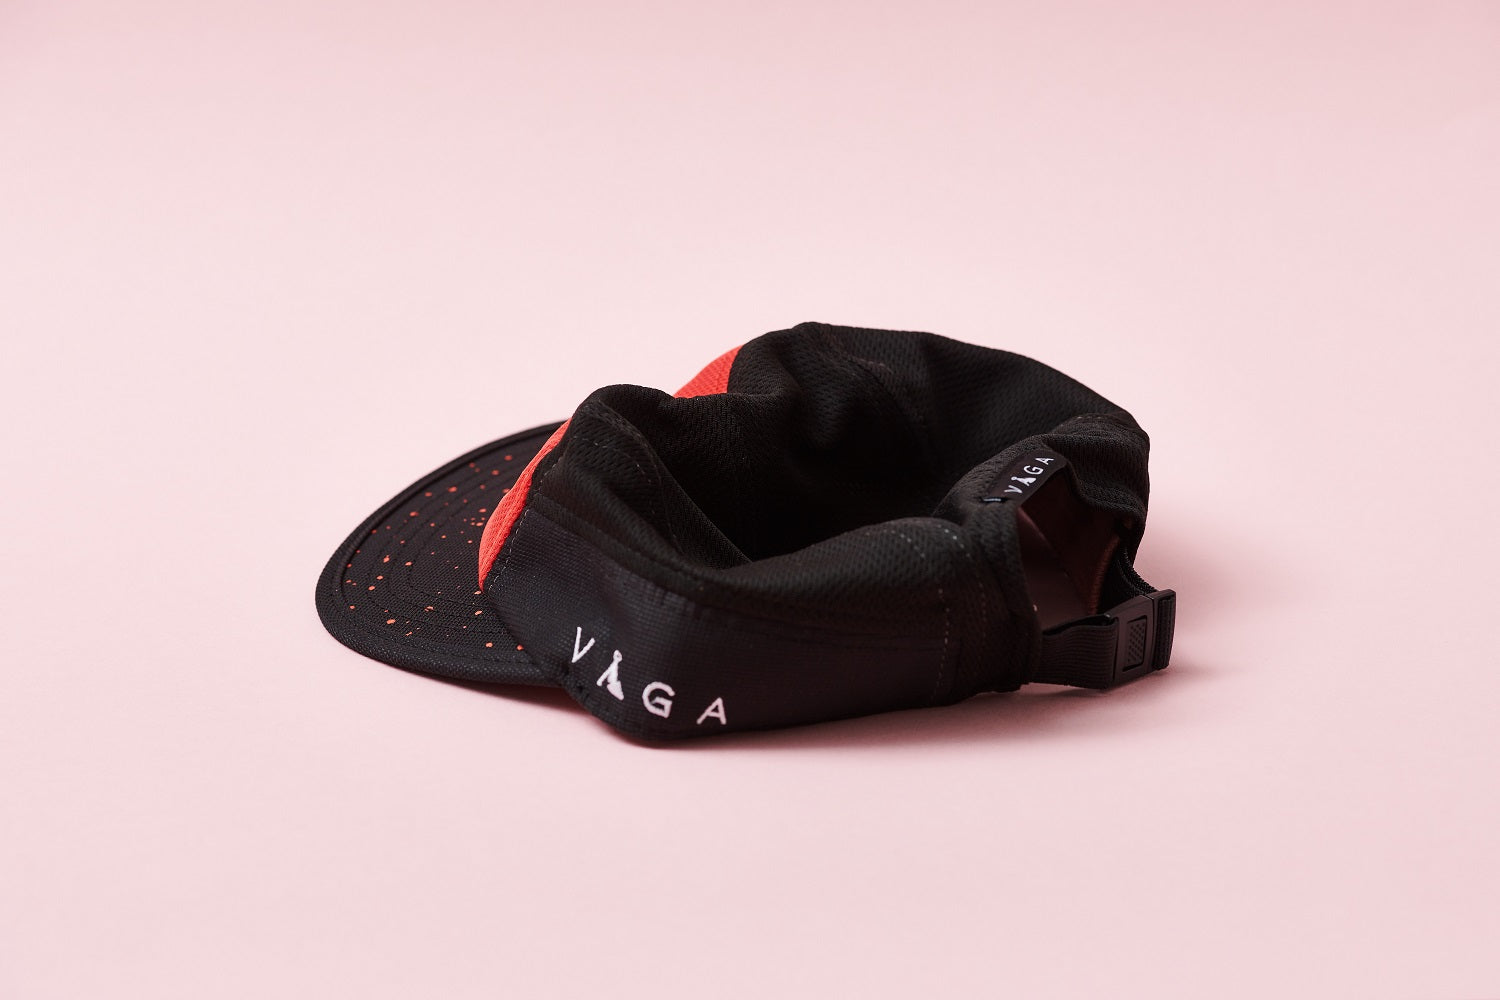 Limited Edition Exhale x Vaga Running Cap